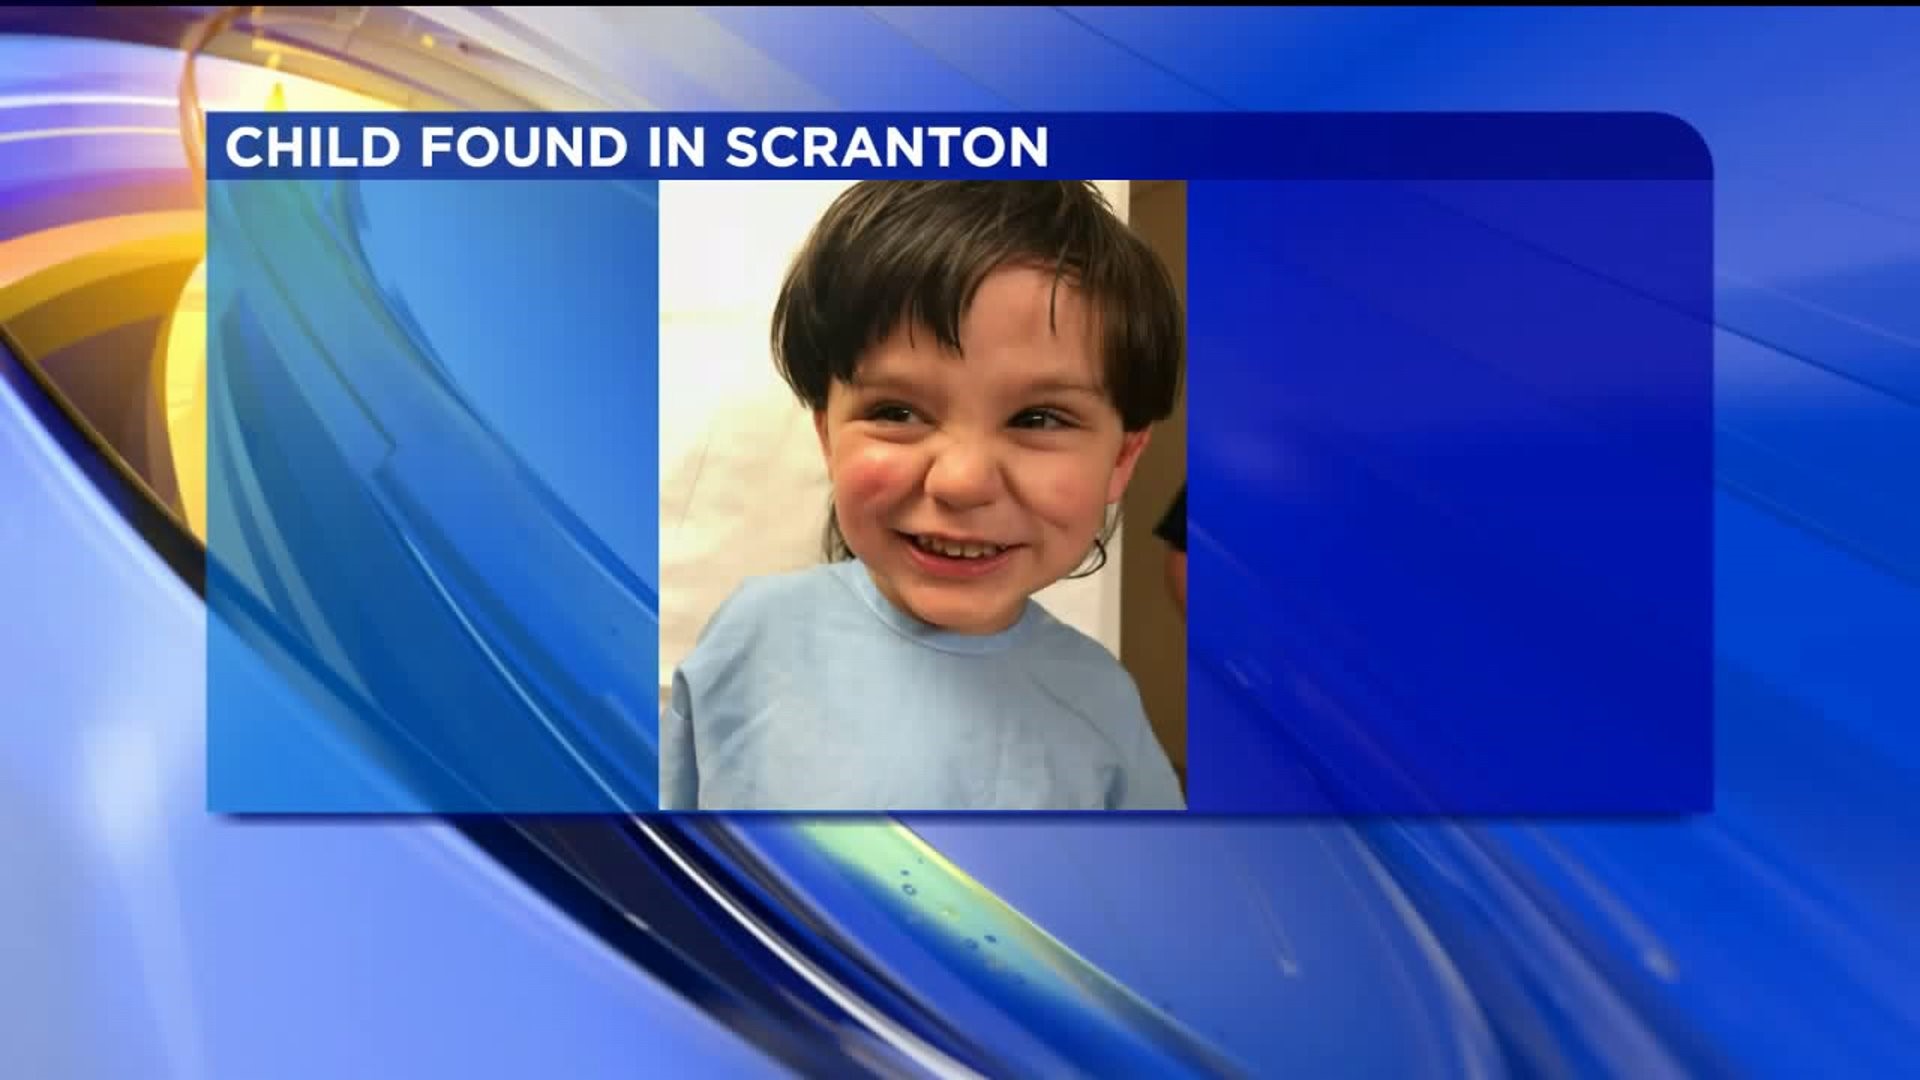 Another Child Found Alone on the Street in Scranton